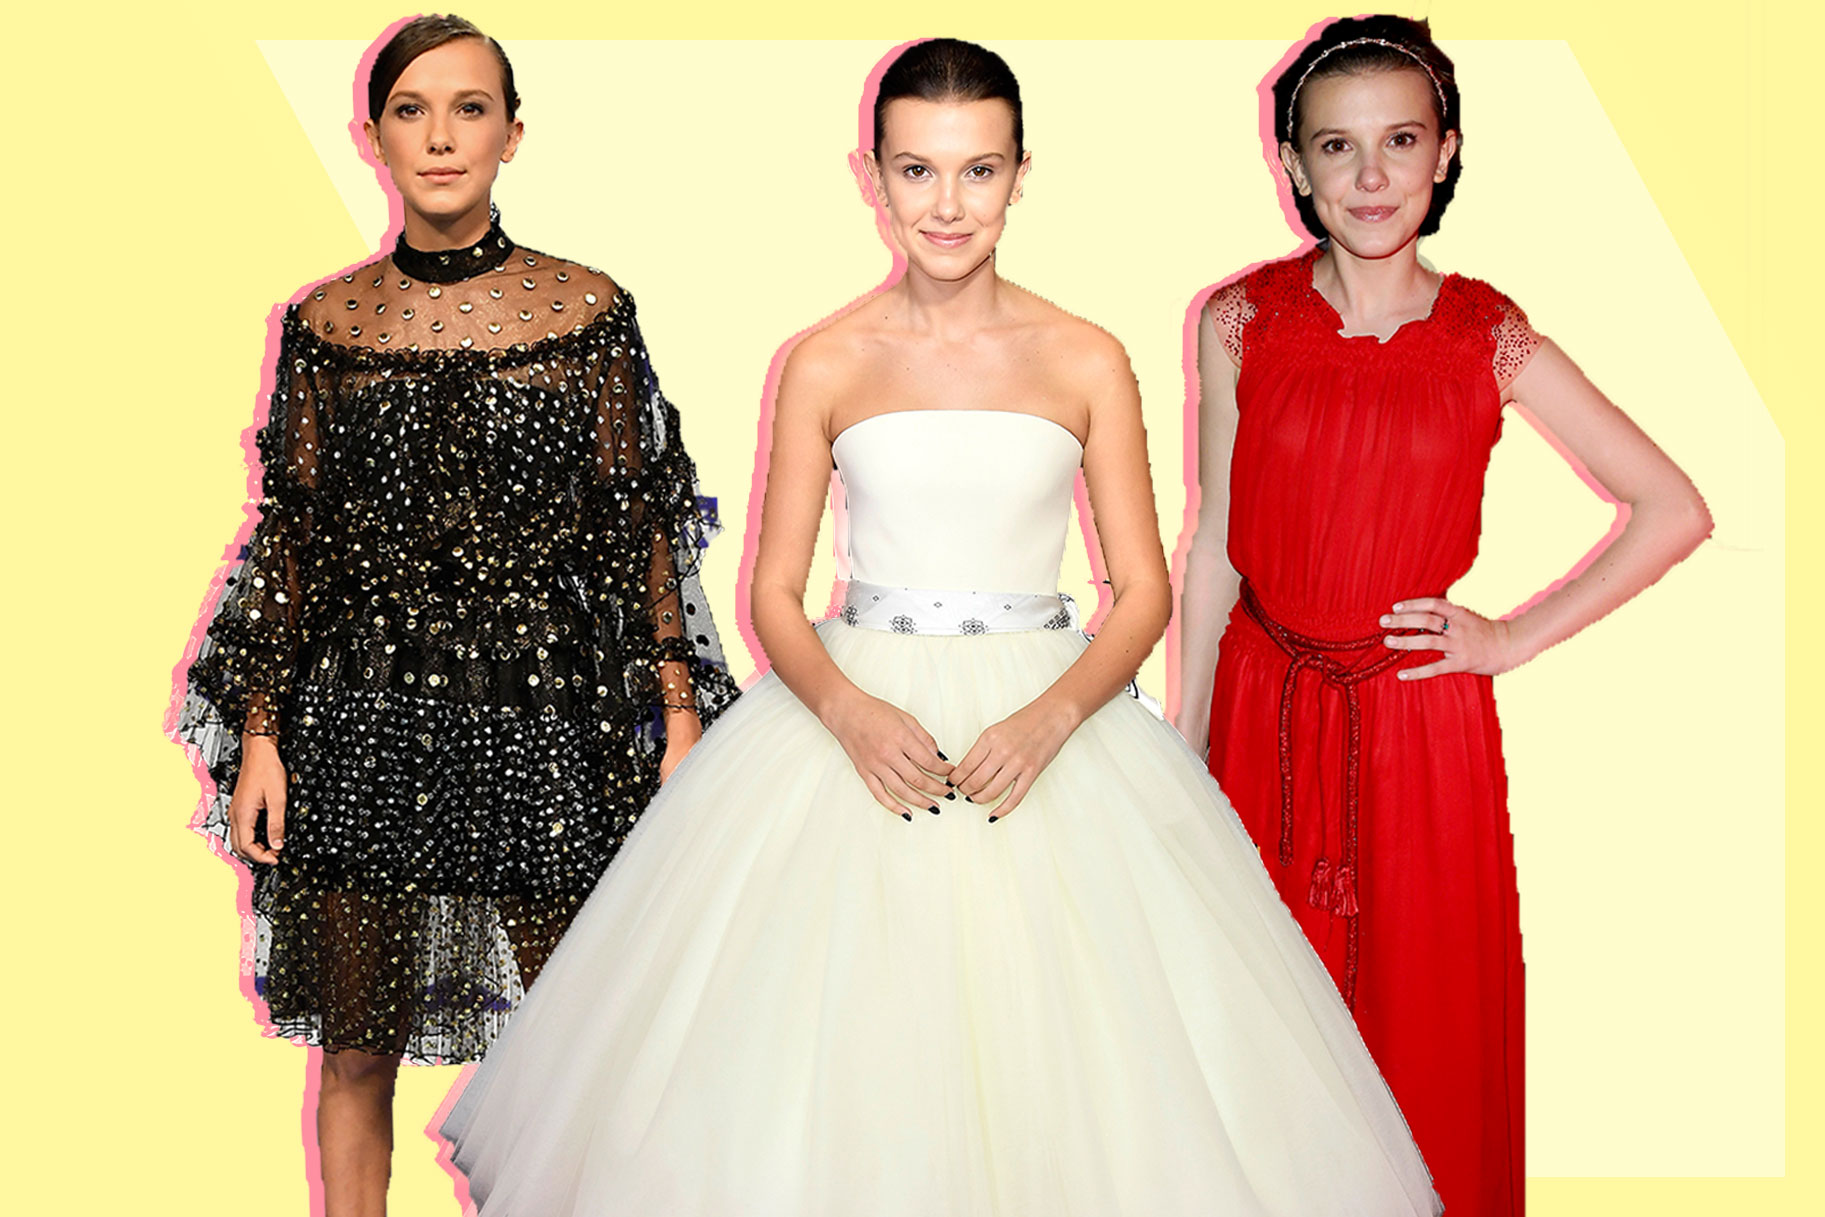 Millie Bobby Brown of “Stranger Things” Shares her Fashion Secret for  Standing on the Red Carpet